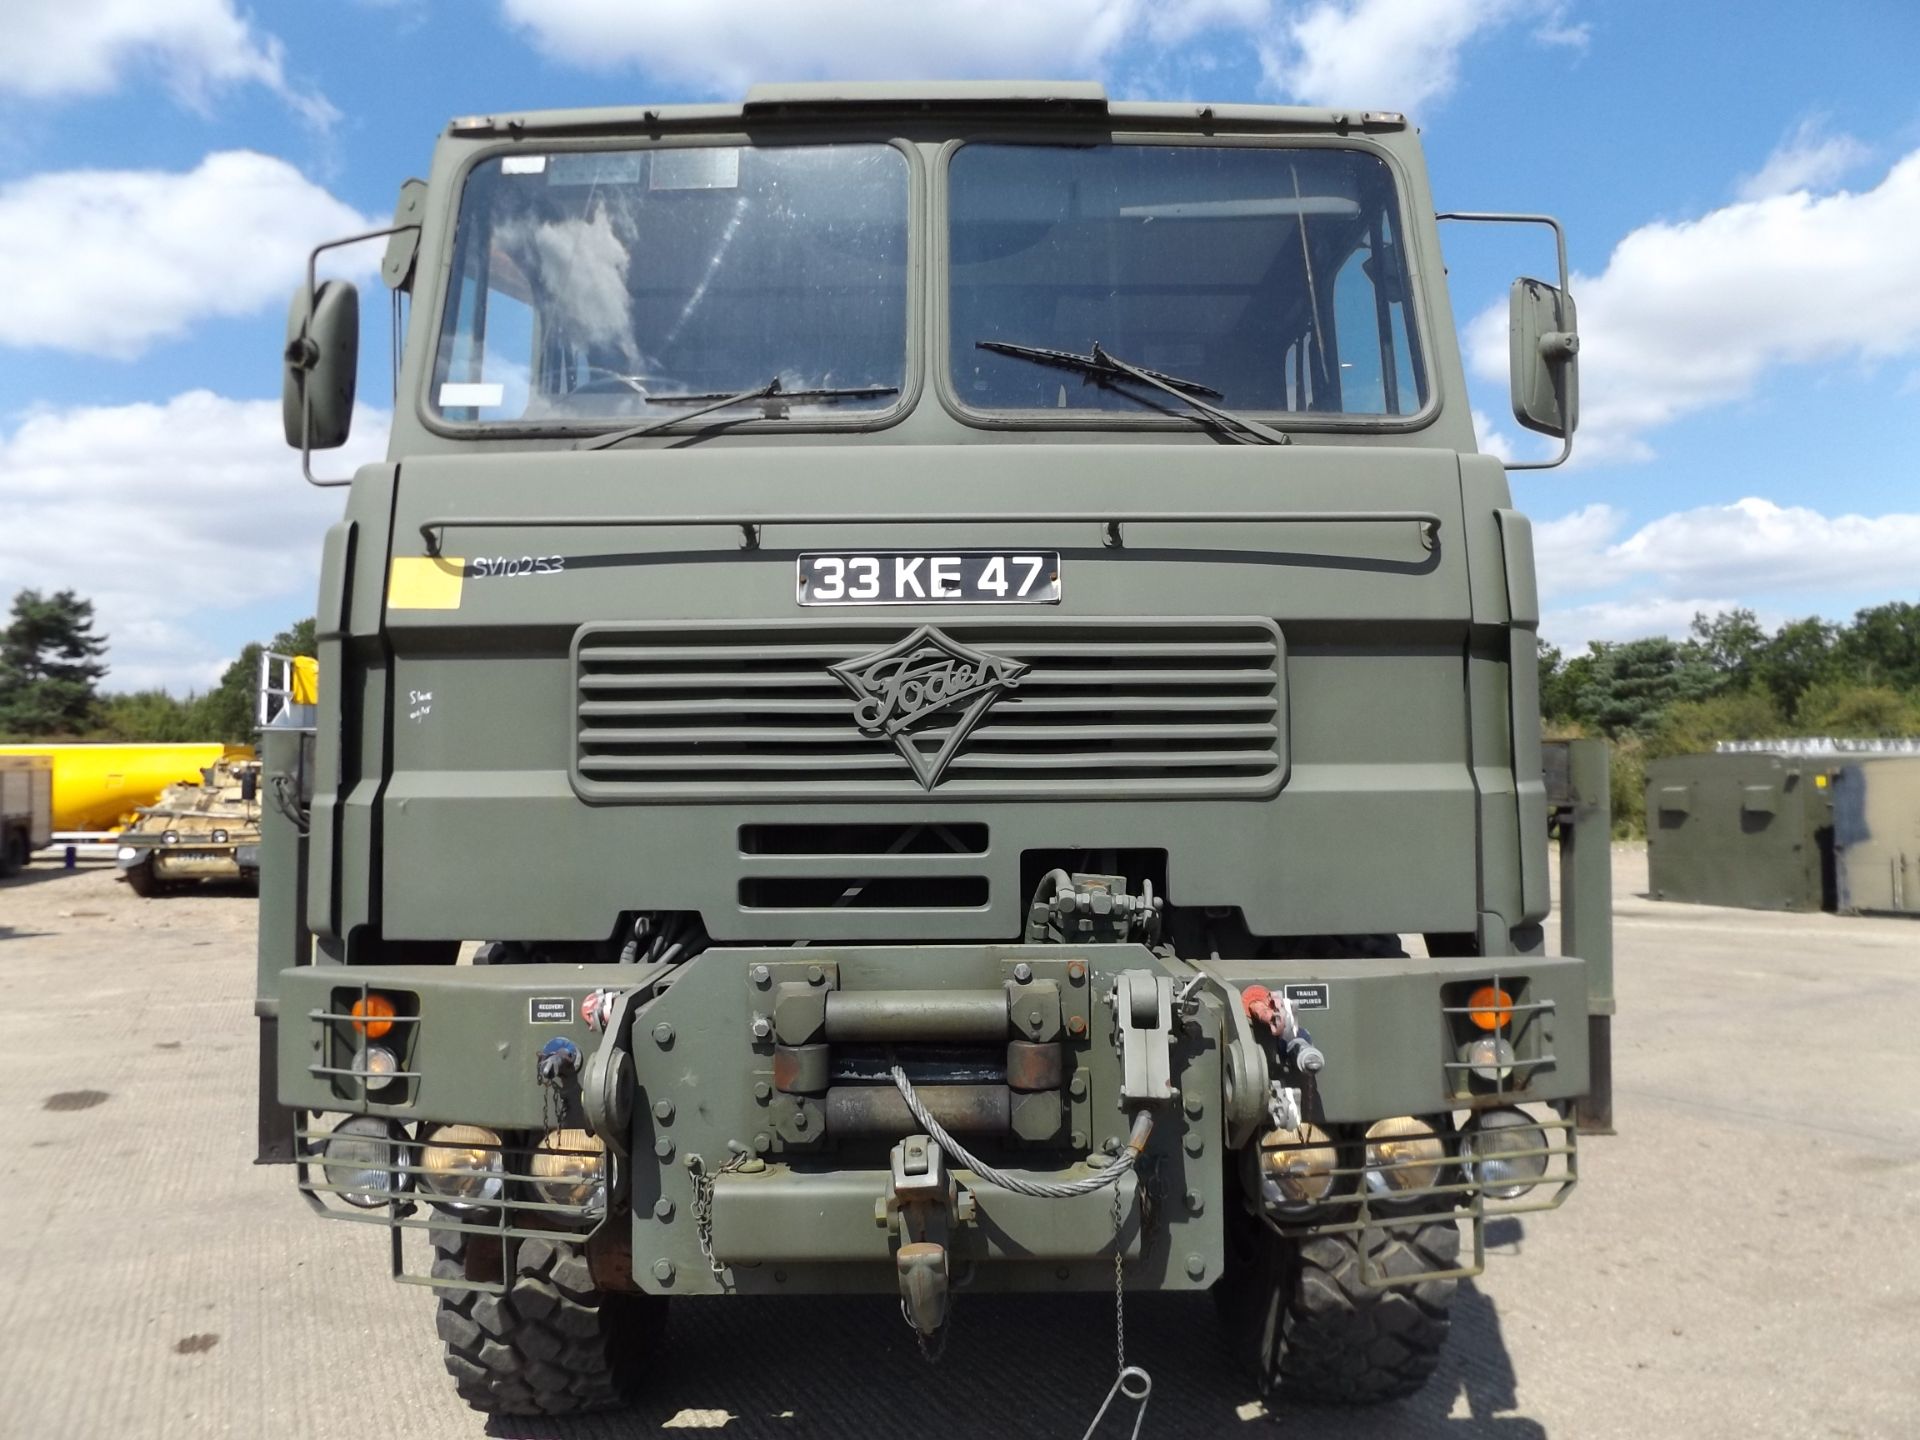 Foden 6x6 Recovery Vehicle which is Complete with Remote and EKA Recovery Tools - Bild 2 aus 24